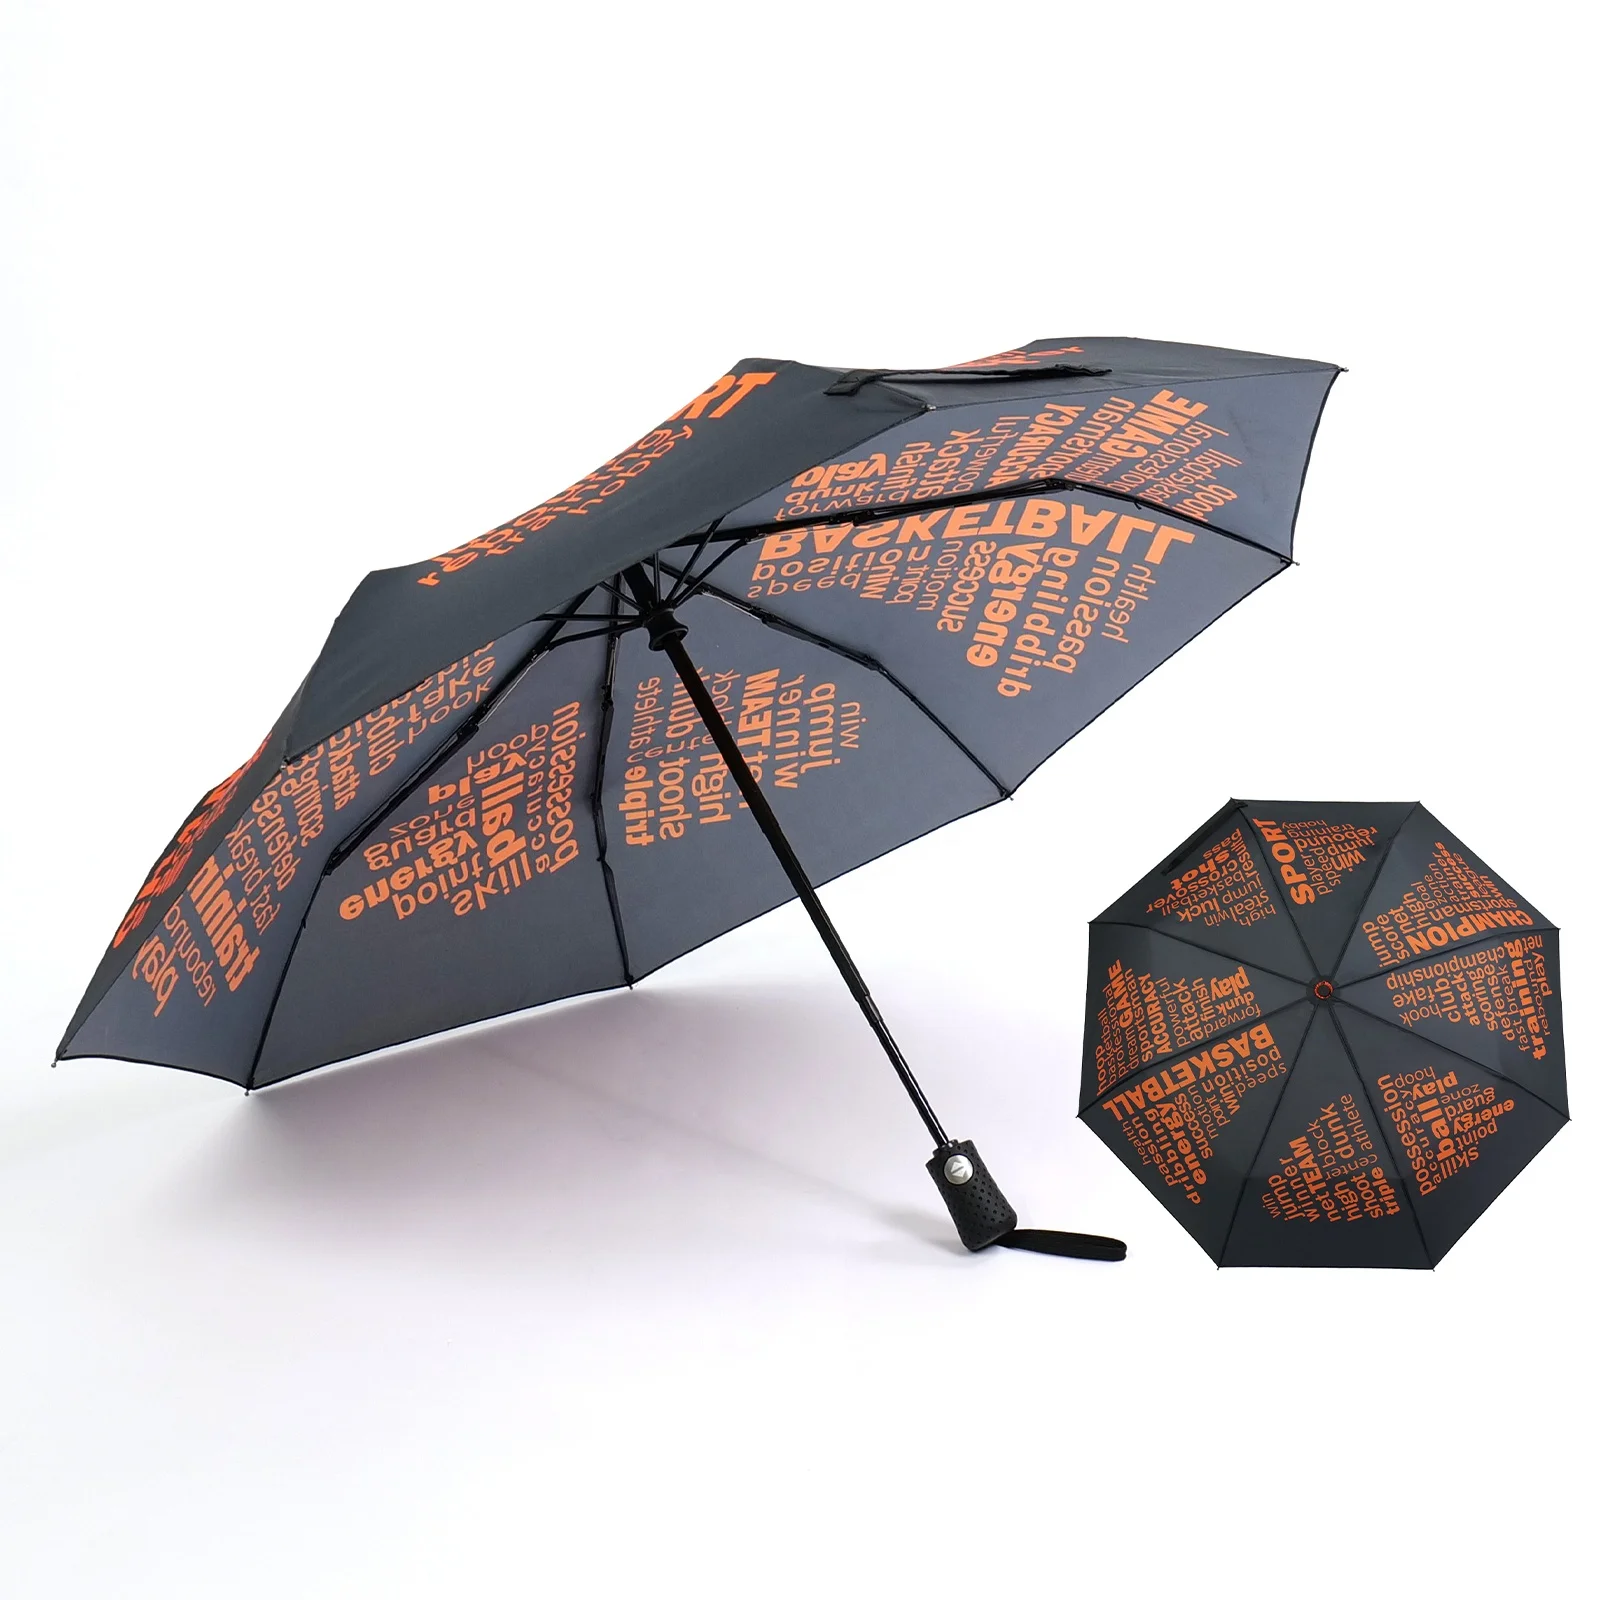 

Portable Automatic Opening Close 3 Folding Button Umbrella with Digital Printing for All Season